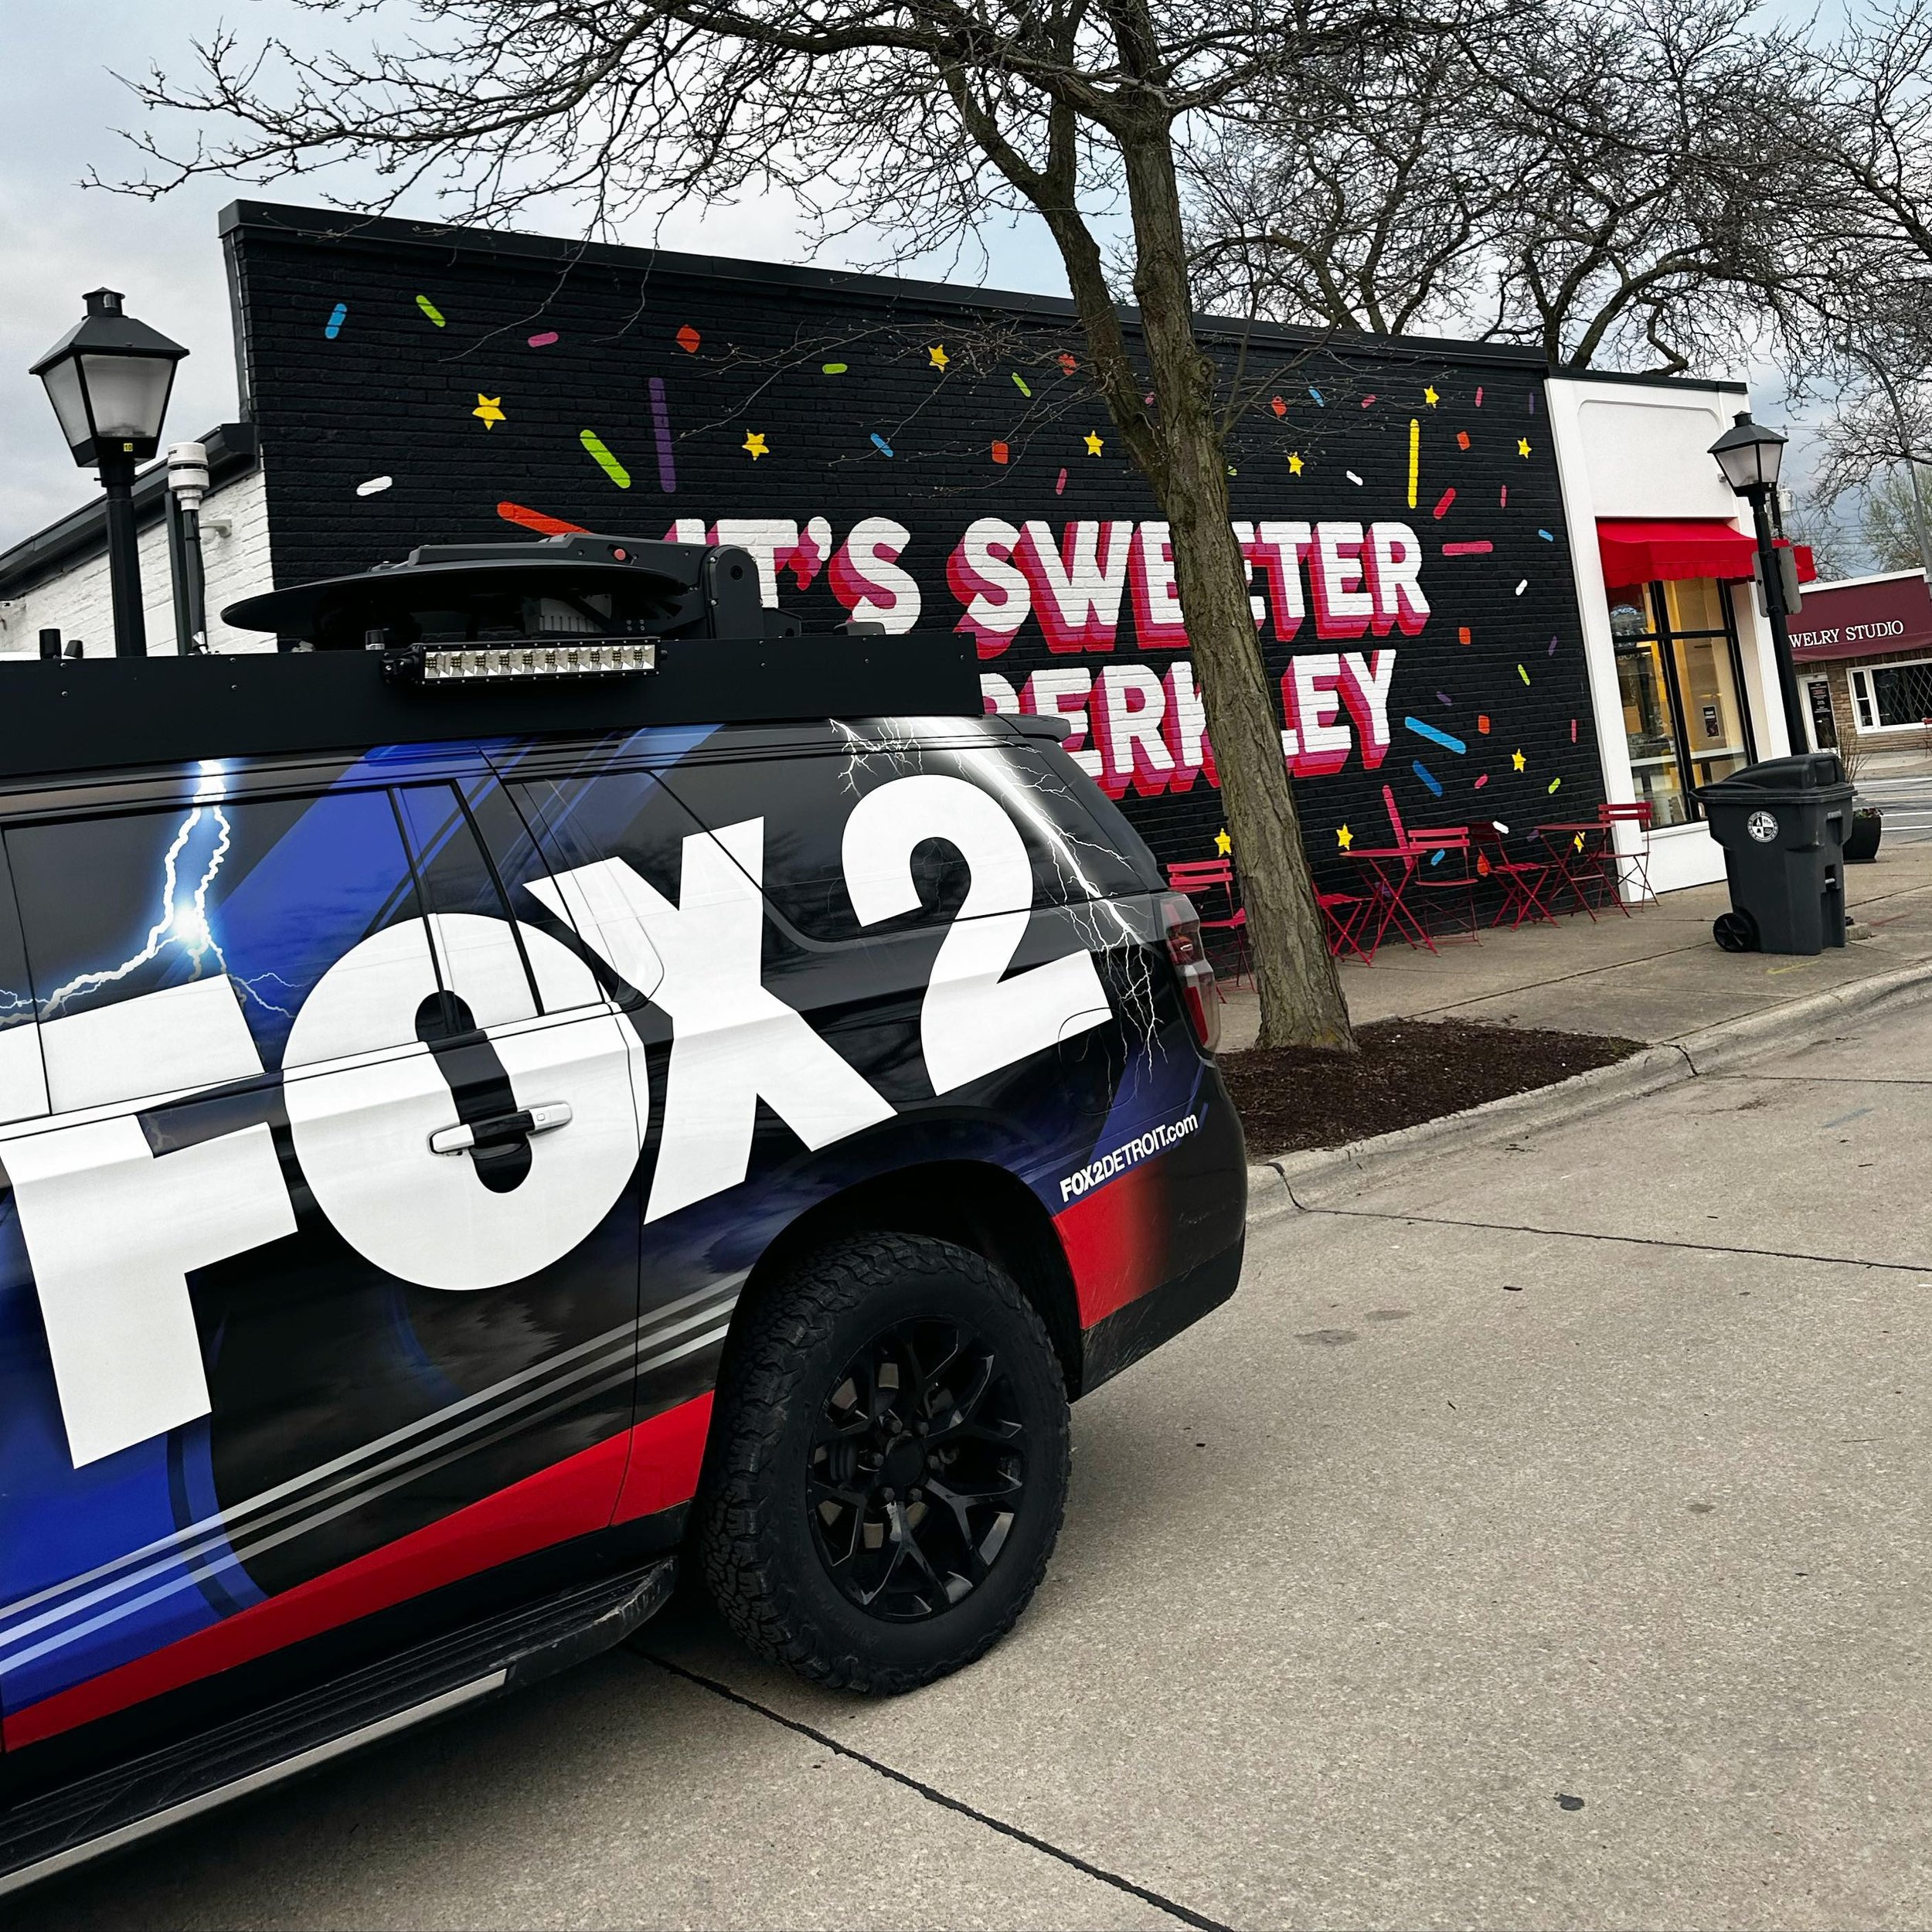 GM! 😊 we&rsquo;re broadcasting live with @fox2detroit all morning long to hype up tomorrow&rsquo;s grand opening! 🎉 Tune in LIVE at 7:45, 8:45 and 9:45! 🎥